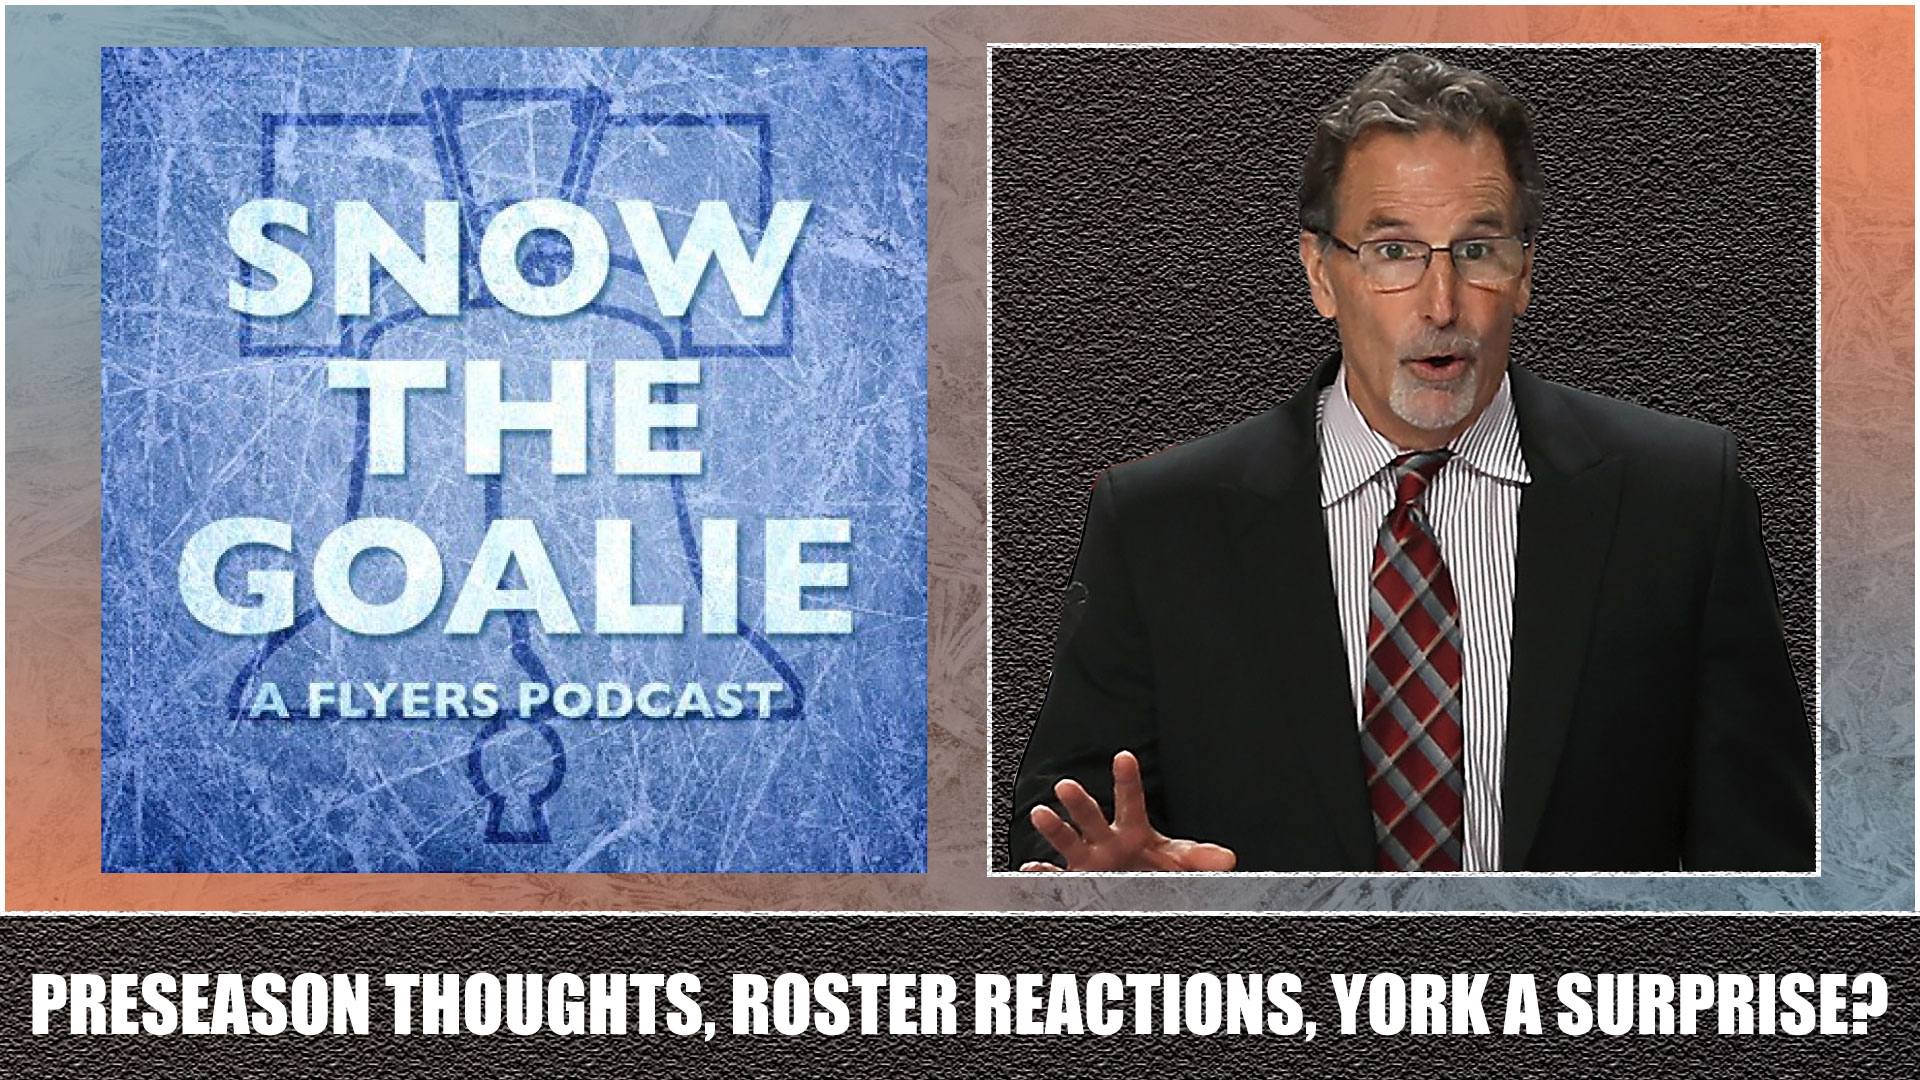 Snow The Goalie: Preseason Thoughts, Roster Reactions, York a Surprise?